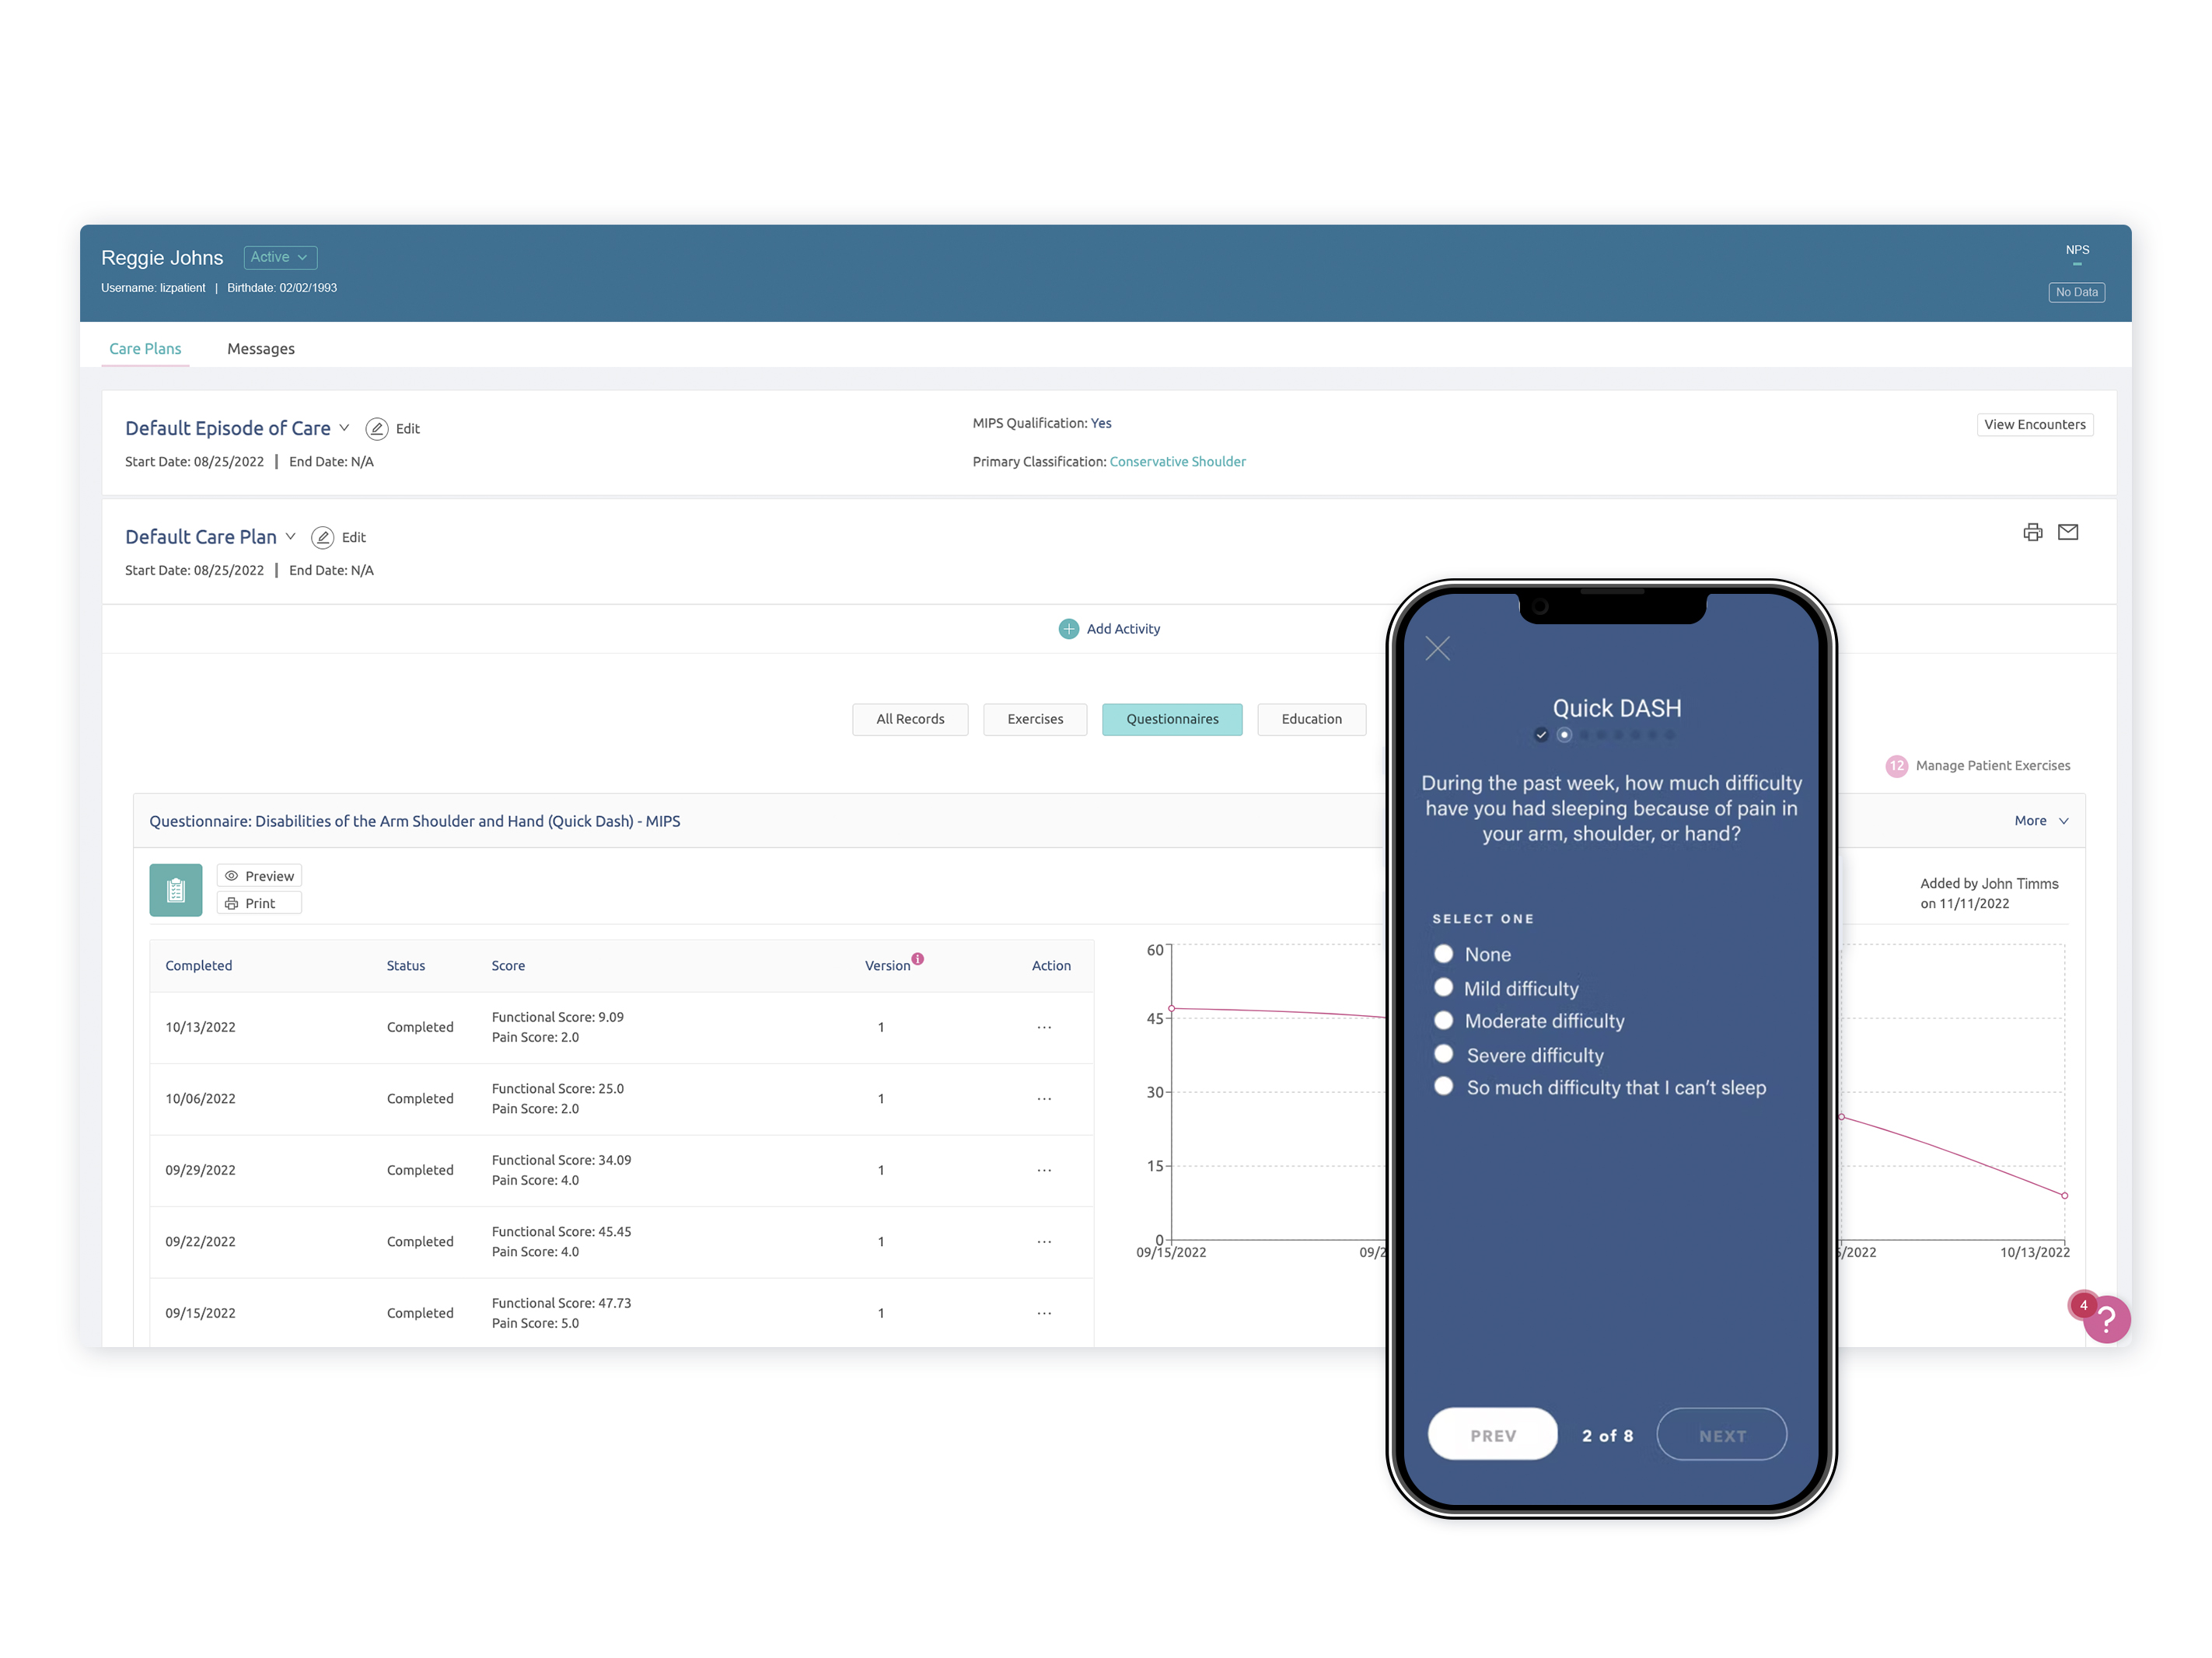 Enhance patient care, optimize clinical operations, and easily fulfill quality measure reporting requirements with our outcomes tracking software & CMS-approved QCDR.